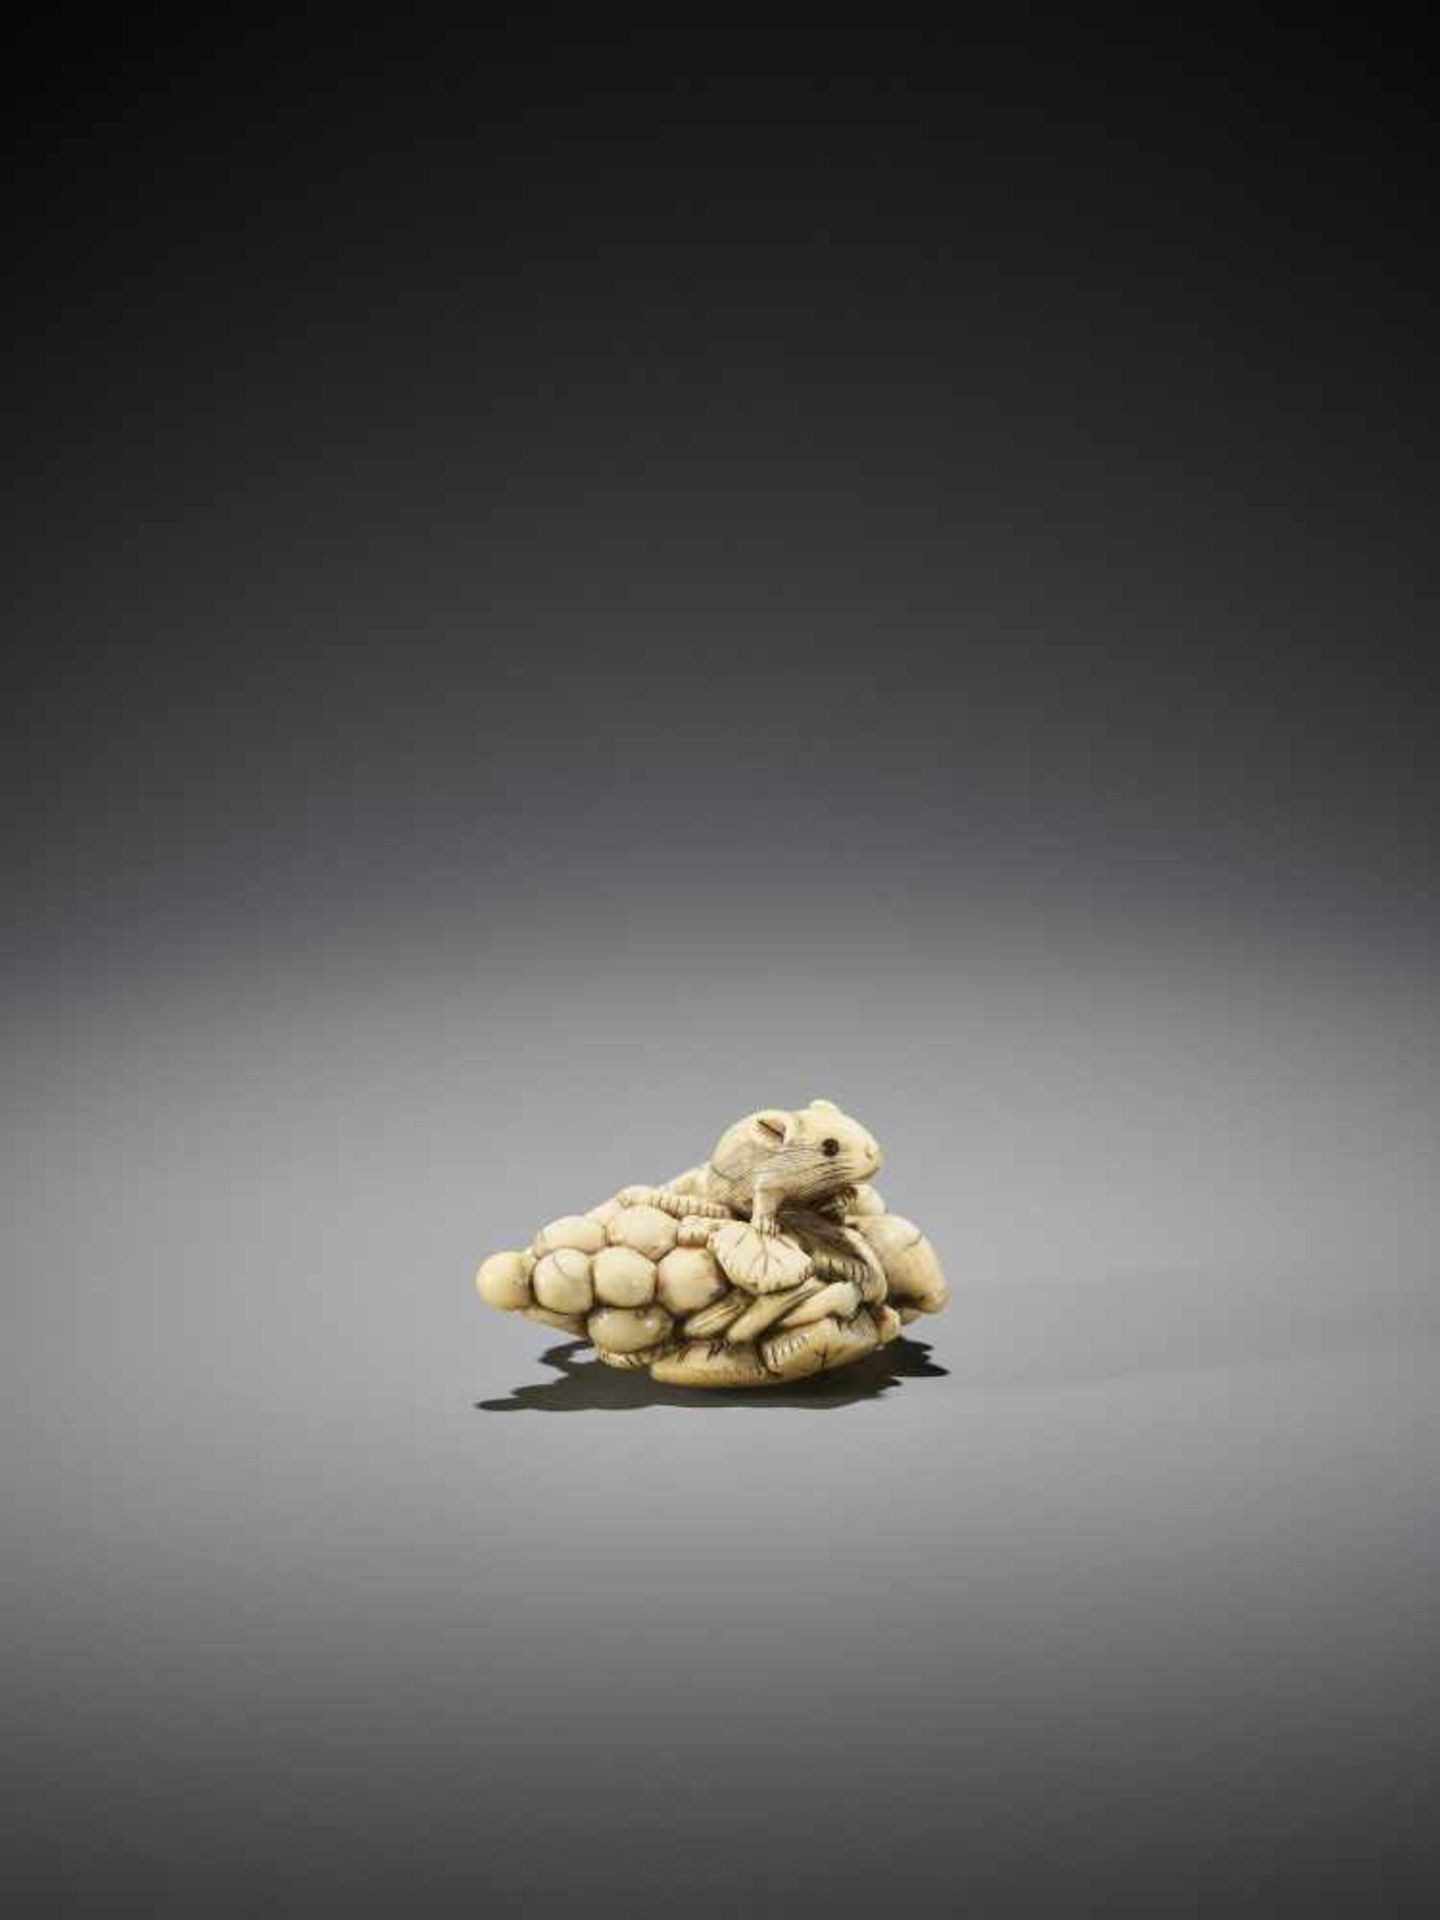 AN IVORY NETSUKE OF A SQUIRELL AND GRAPES - Image 9 of 10